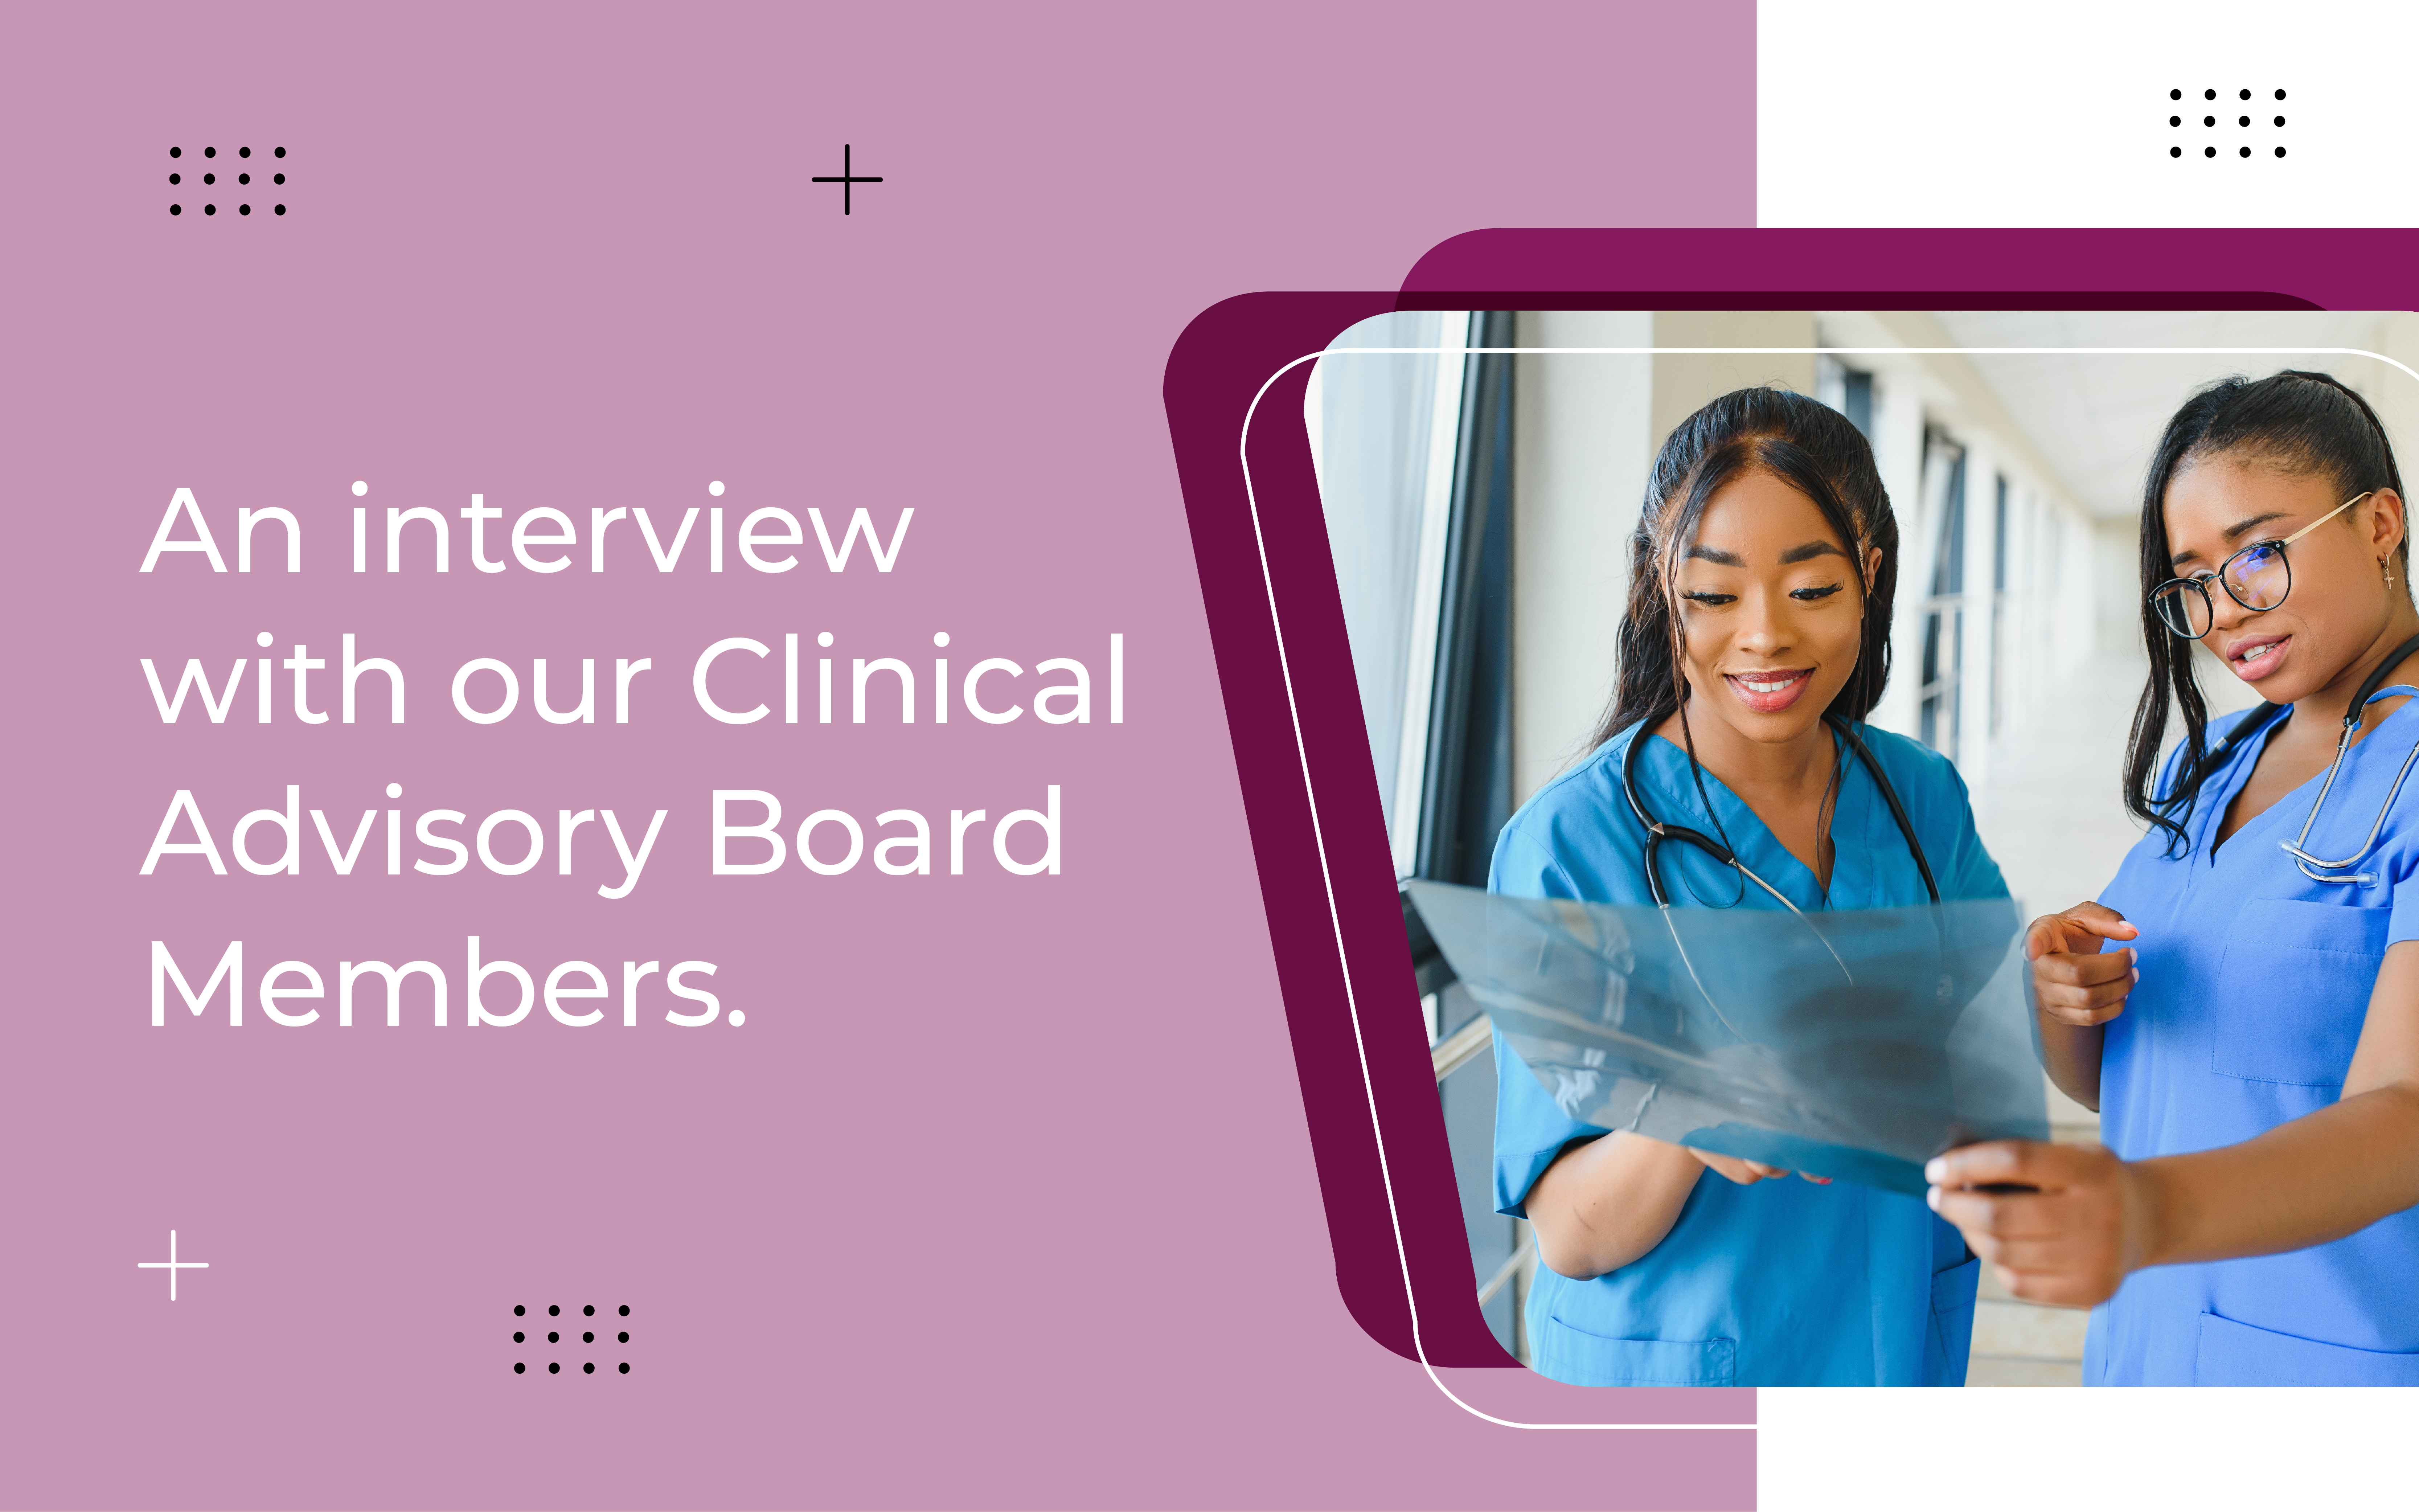 An interview with our Clinical Advisory Board Members